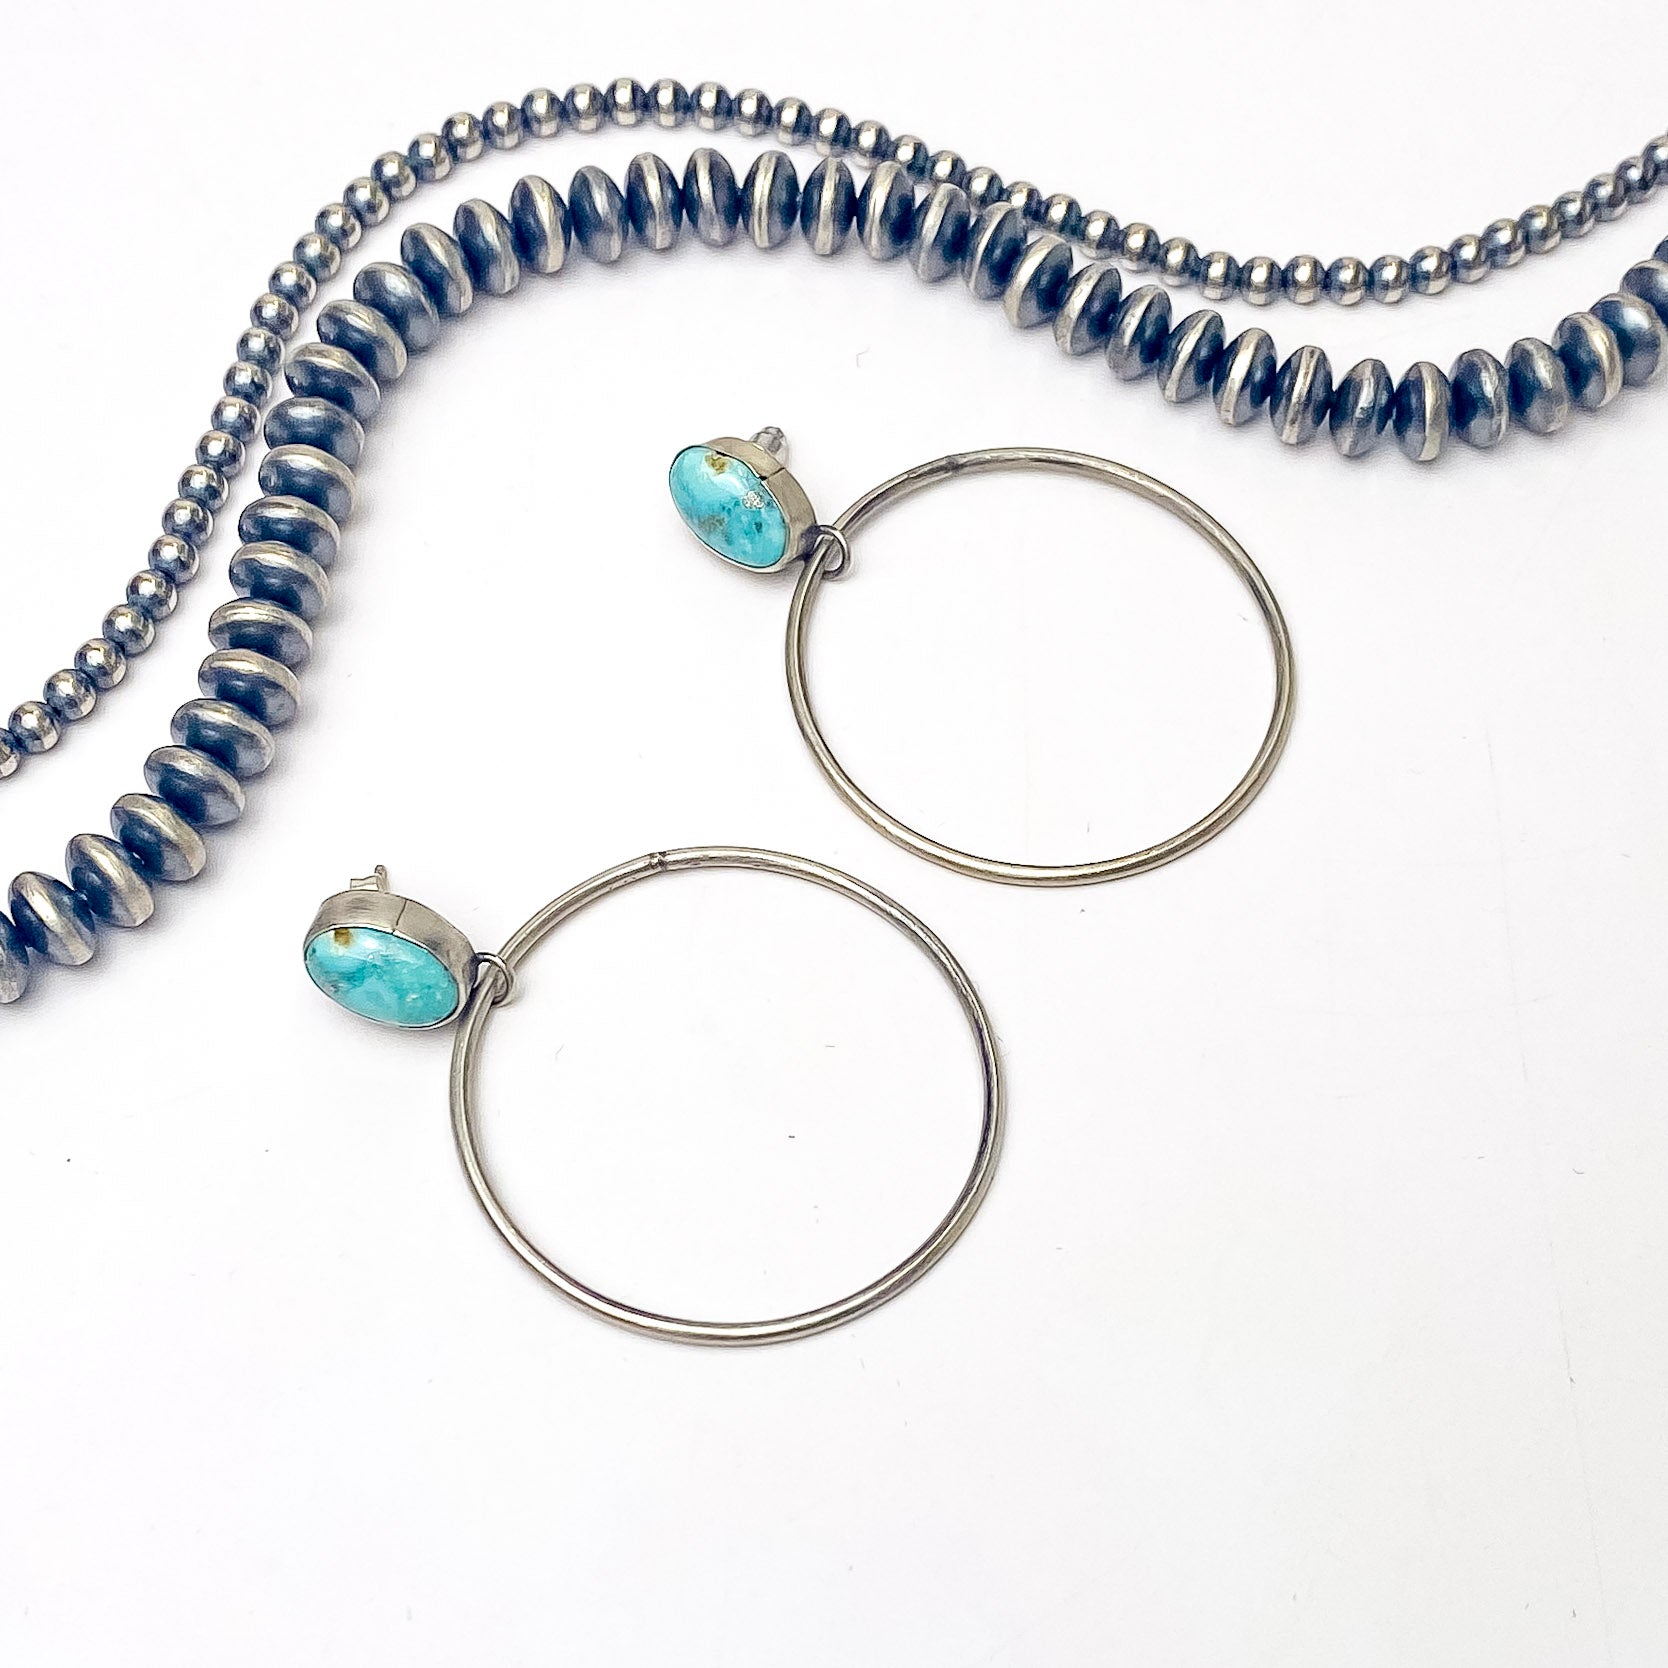 Tricia Smith | Navajo Handmade Hoop Sterling Silver Earrings with Turquoise Stones